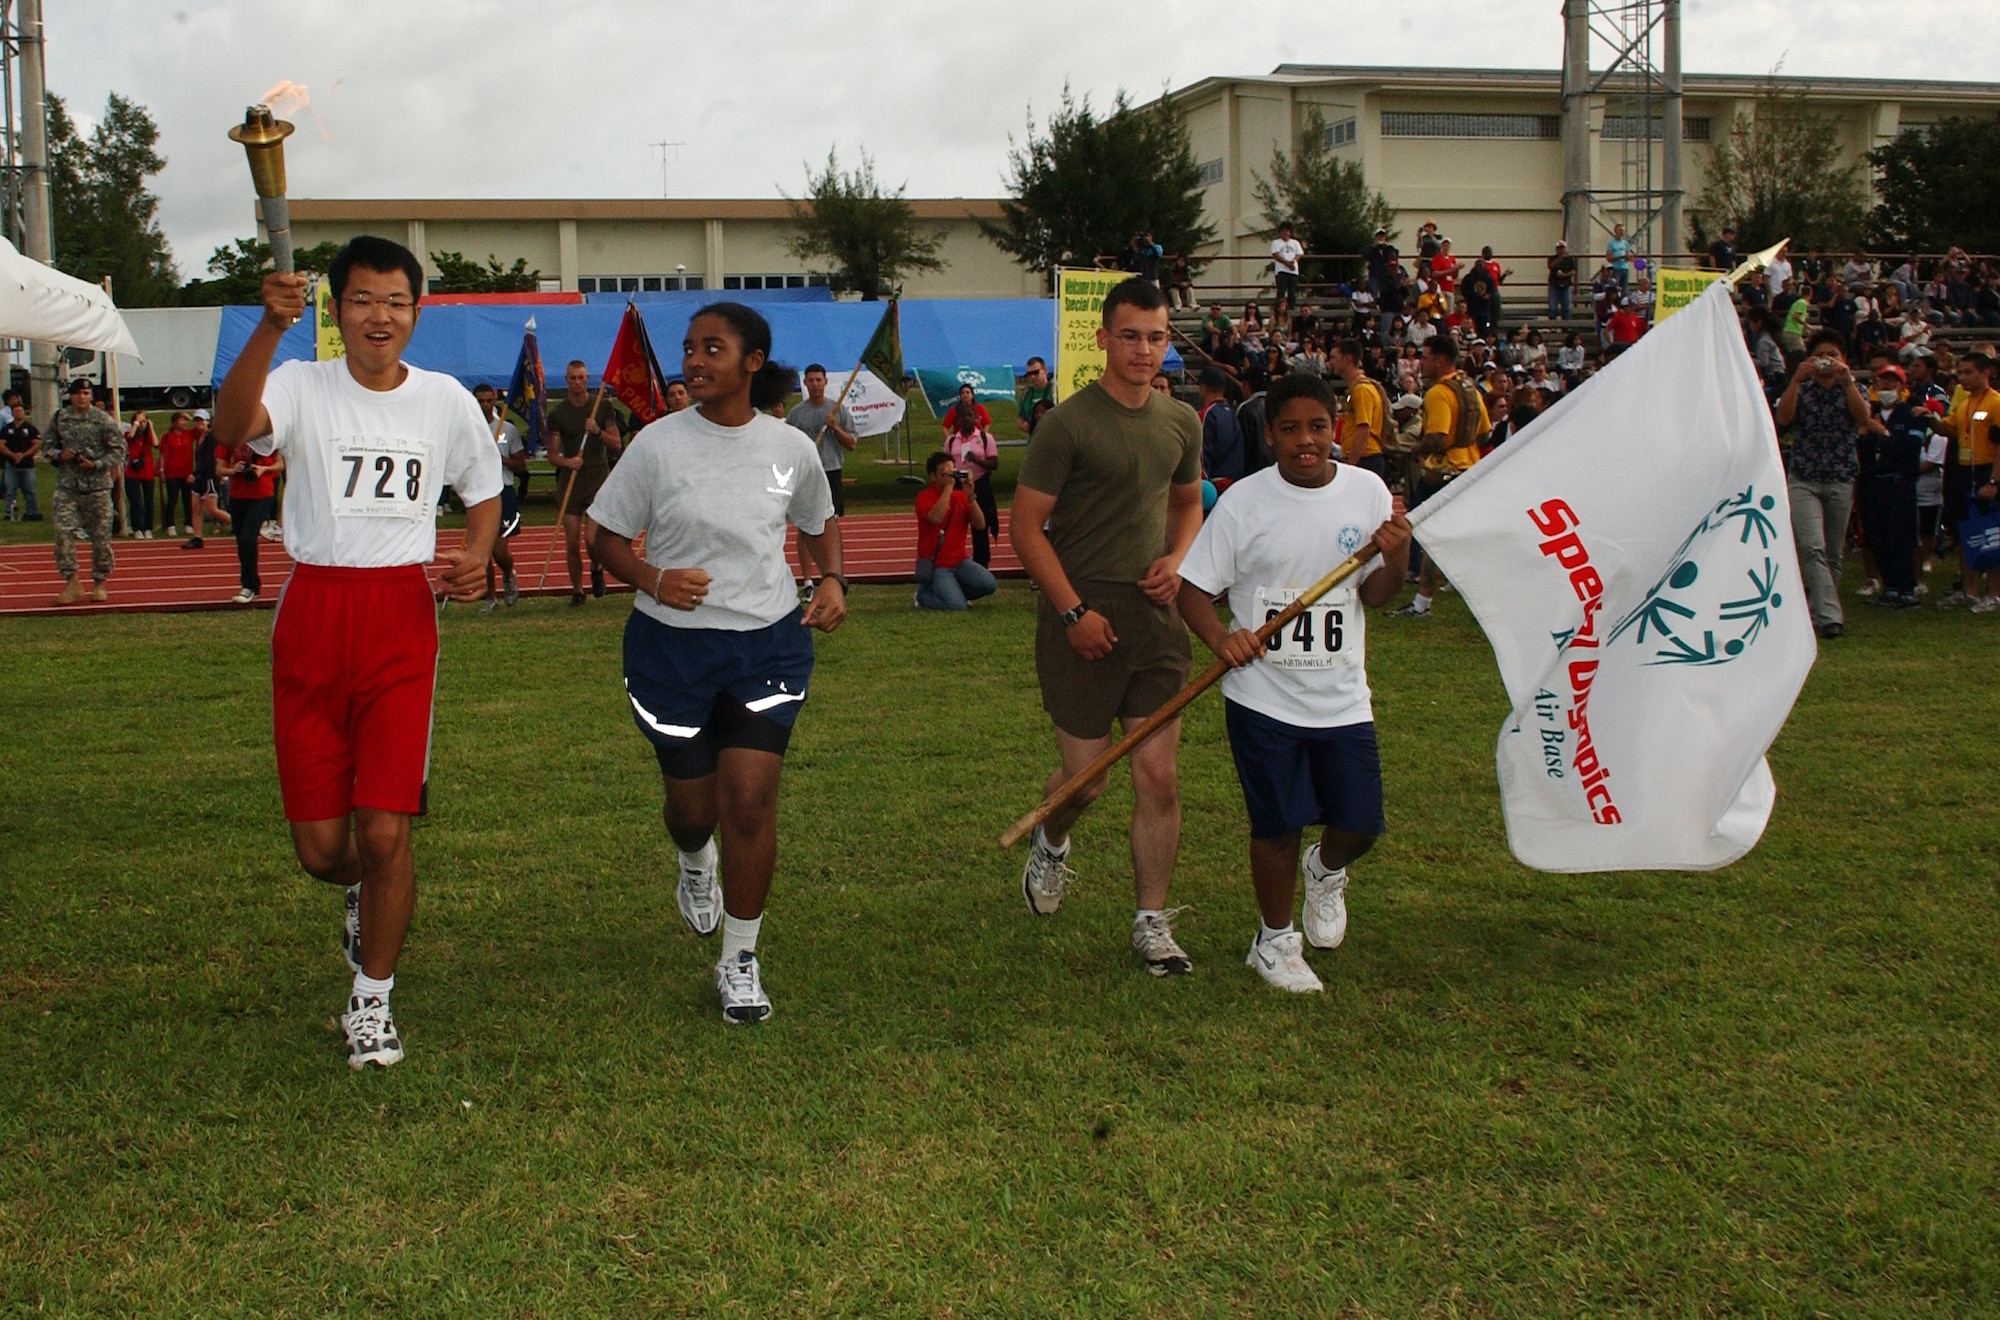 Military members escort an athlete as he walks with the Olympic torch during the opening ceremonies of the Kadena Special Olympics, held Nov. 14 at Kadena Air Base, Japan. This was the 10th anniversary of the KSO, a sporting event dedicated to enriching the lives of special needs individuals.
(U.S. Air Force photo/Tech. Sgt. Reynaldo Ramon)